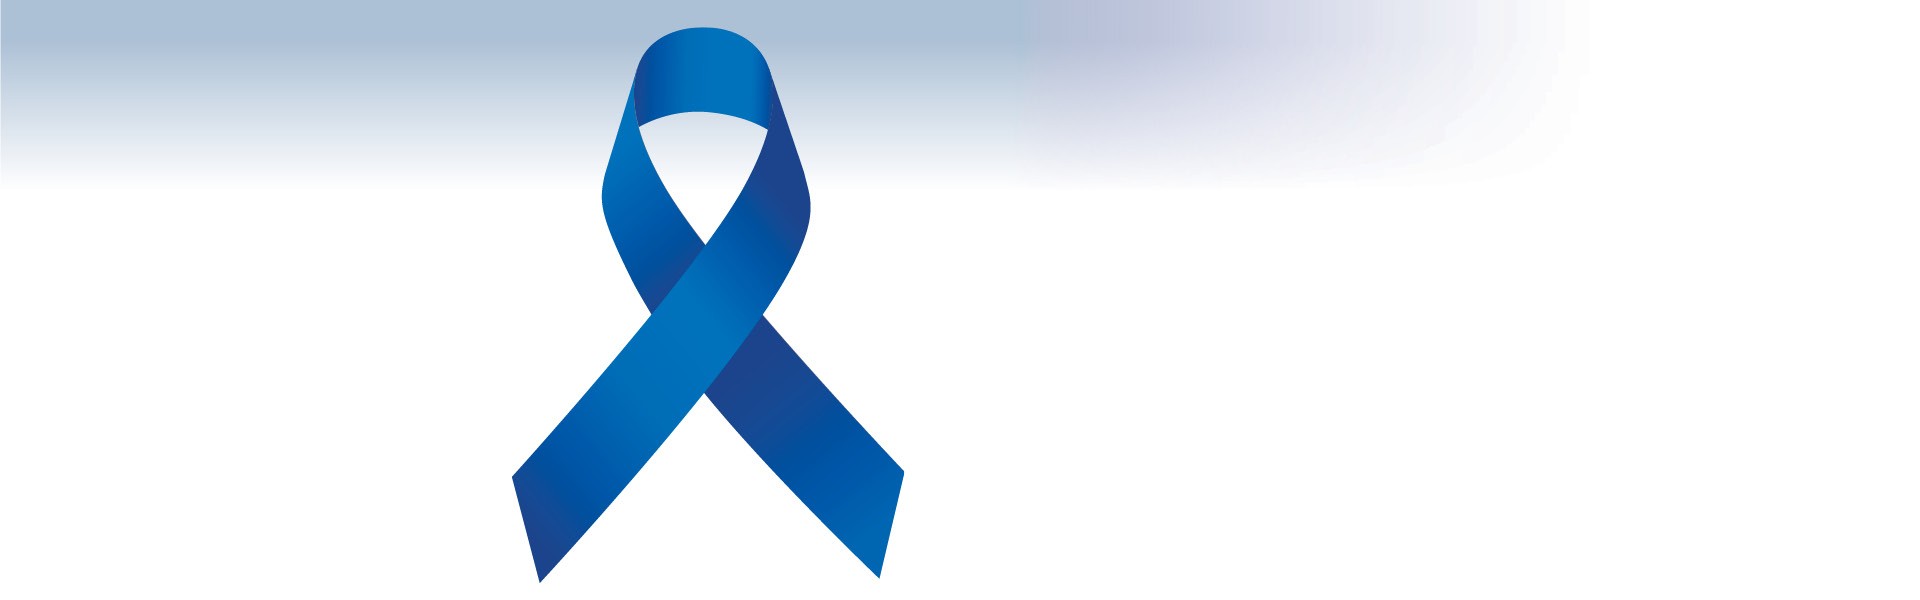 March is Colorectal Cancer Awareness Month.